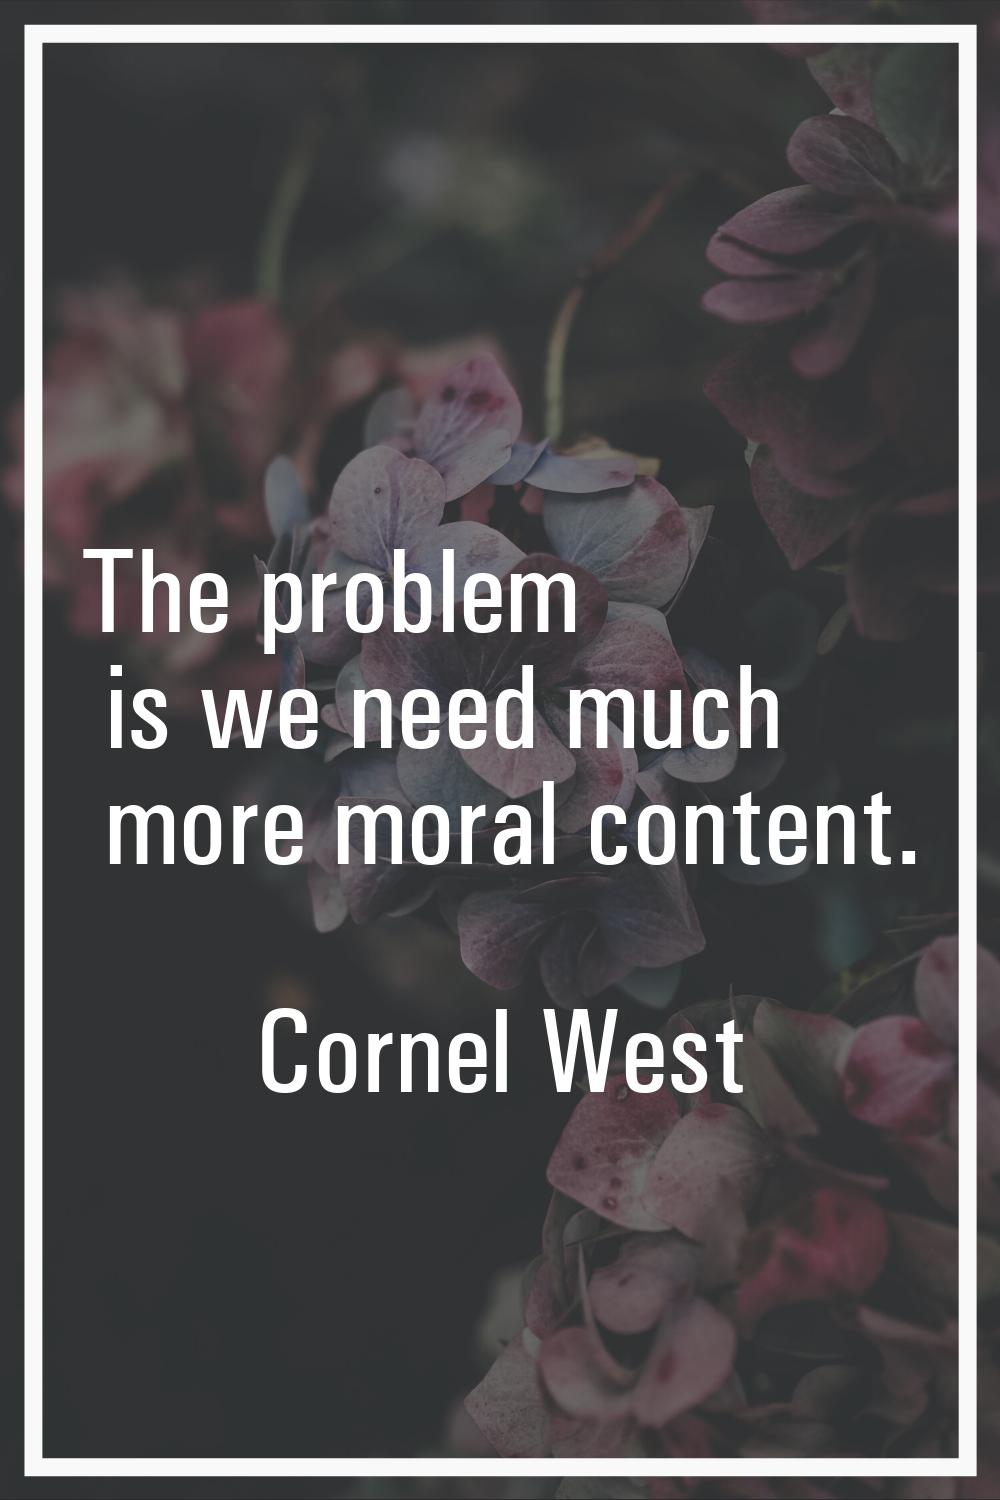 The problem is we need much more moral content.